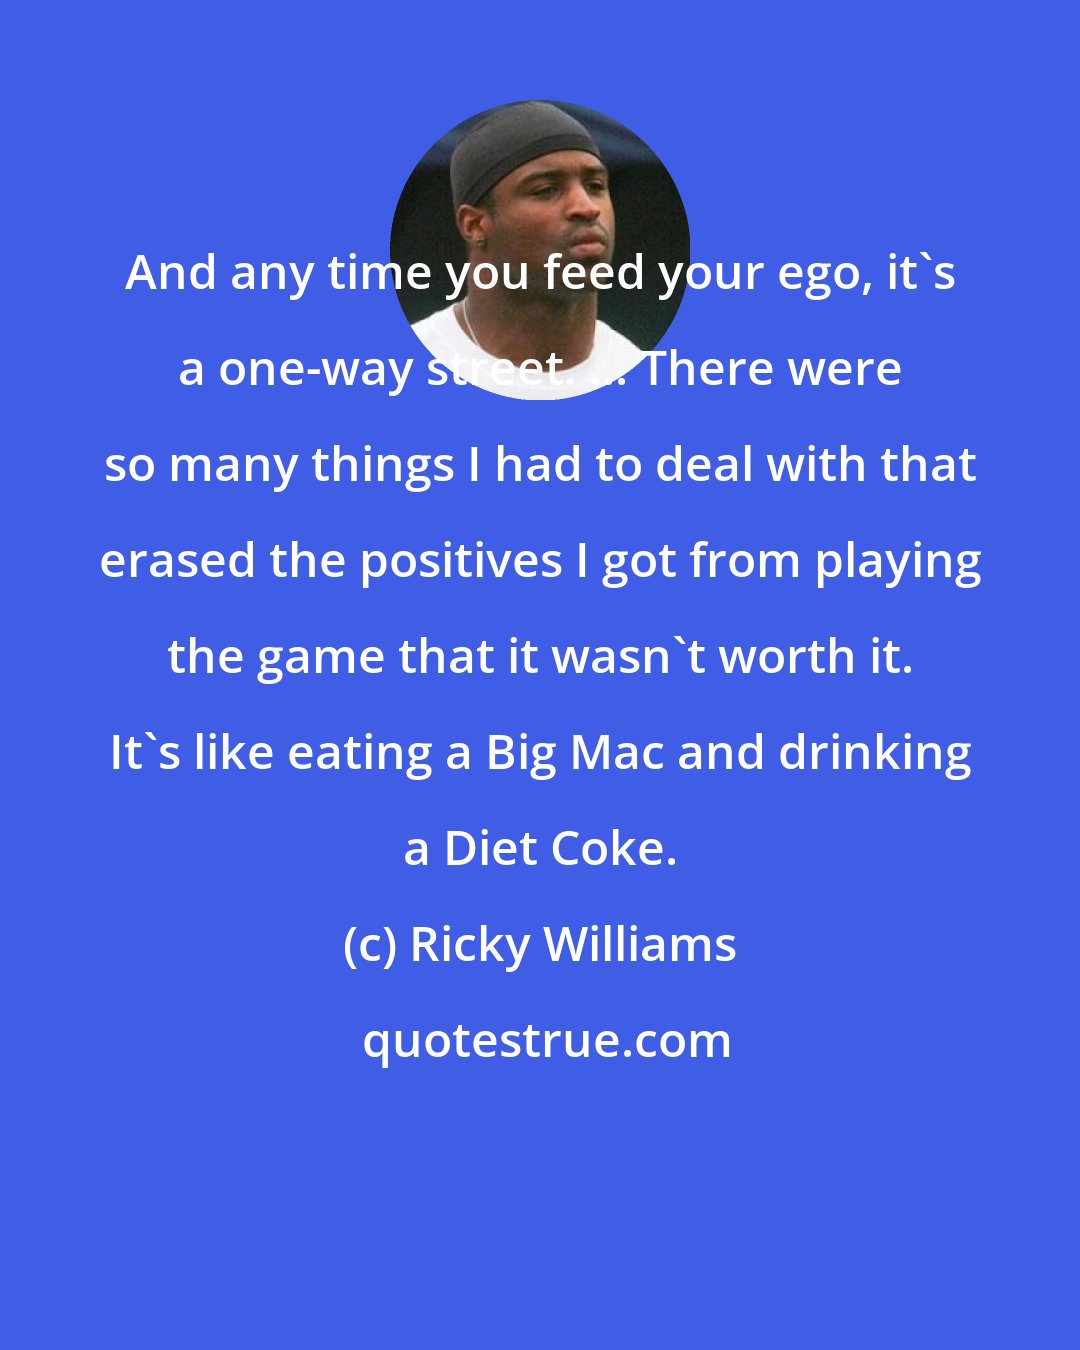 Ricky Williams: And any time you feed your ego, it's a one-way street. ... There were so many things I had to deal with that erased the positives I got from playing the game that it wasn't worth it. It's like eating a Big Mac and drinking a Diet Coke.